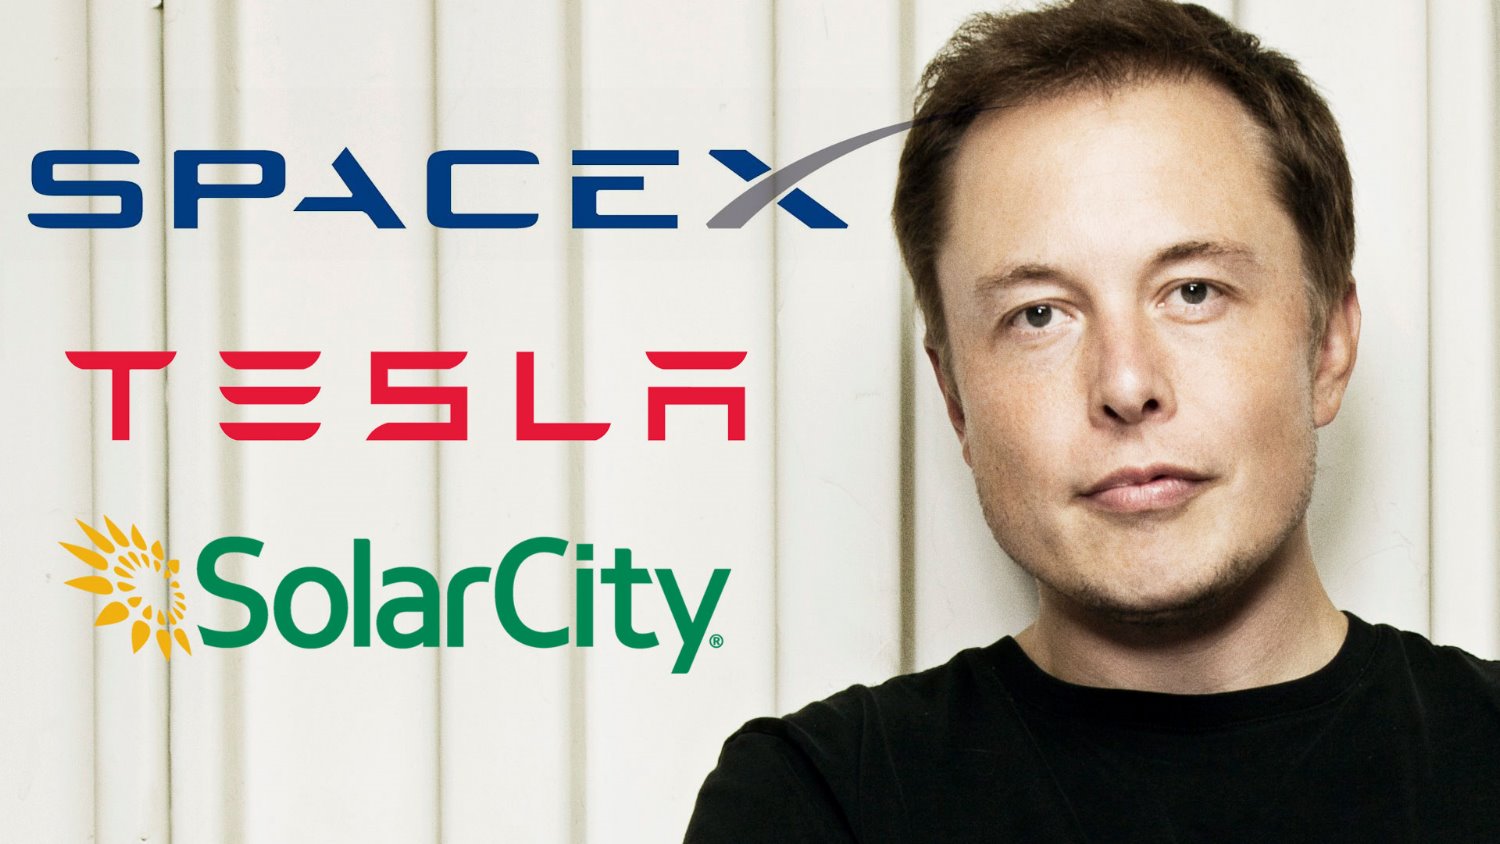 Elon Musk is the same sort of visionary as Steve Jobs was, and exhibits the same trait of driving his staff to achieve the impossible. Apple needs Elon Musk to give them the 'vision' again and Musk needs Apple's cash hoard to deliver 500,000 cars a year by 2020